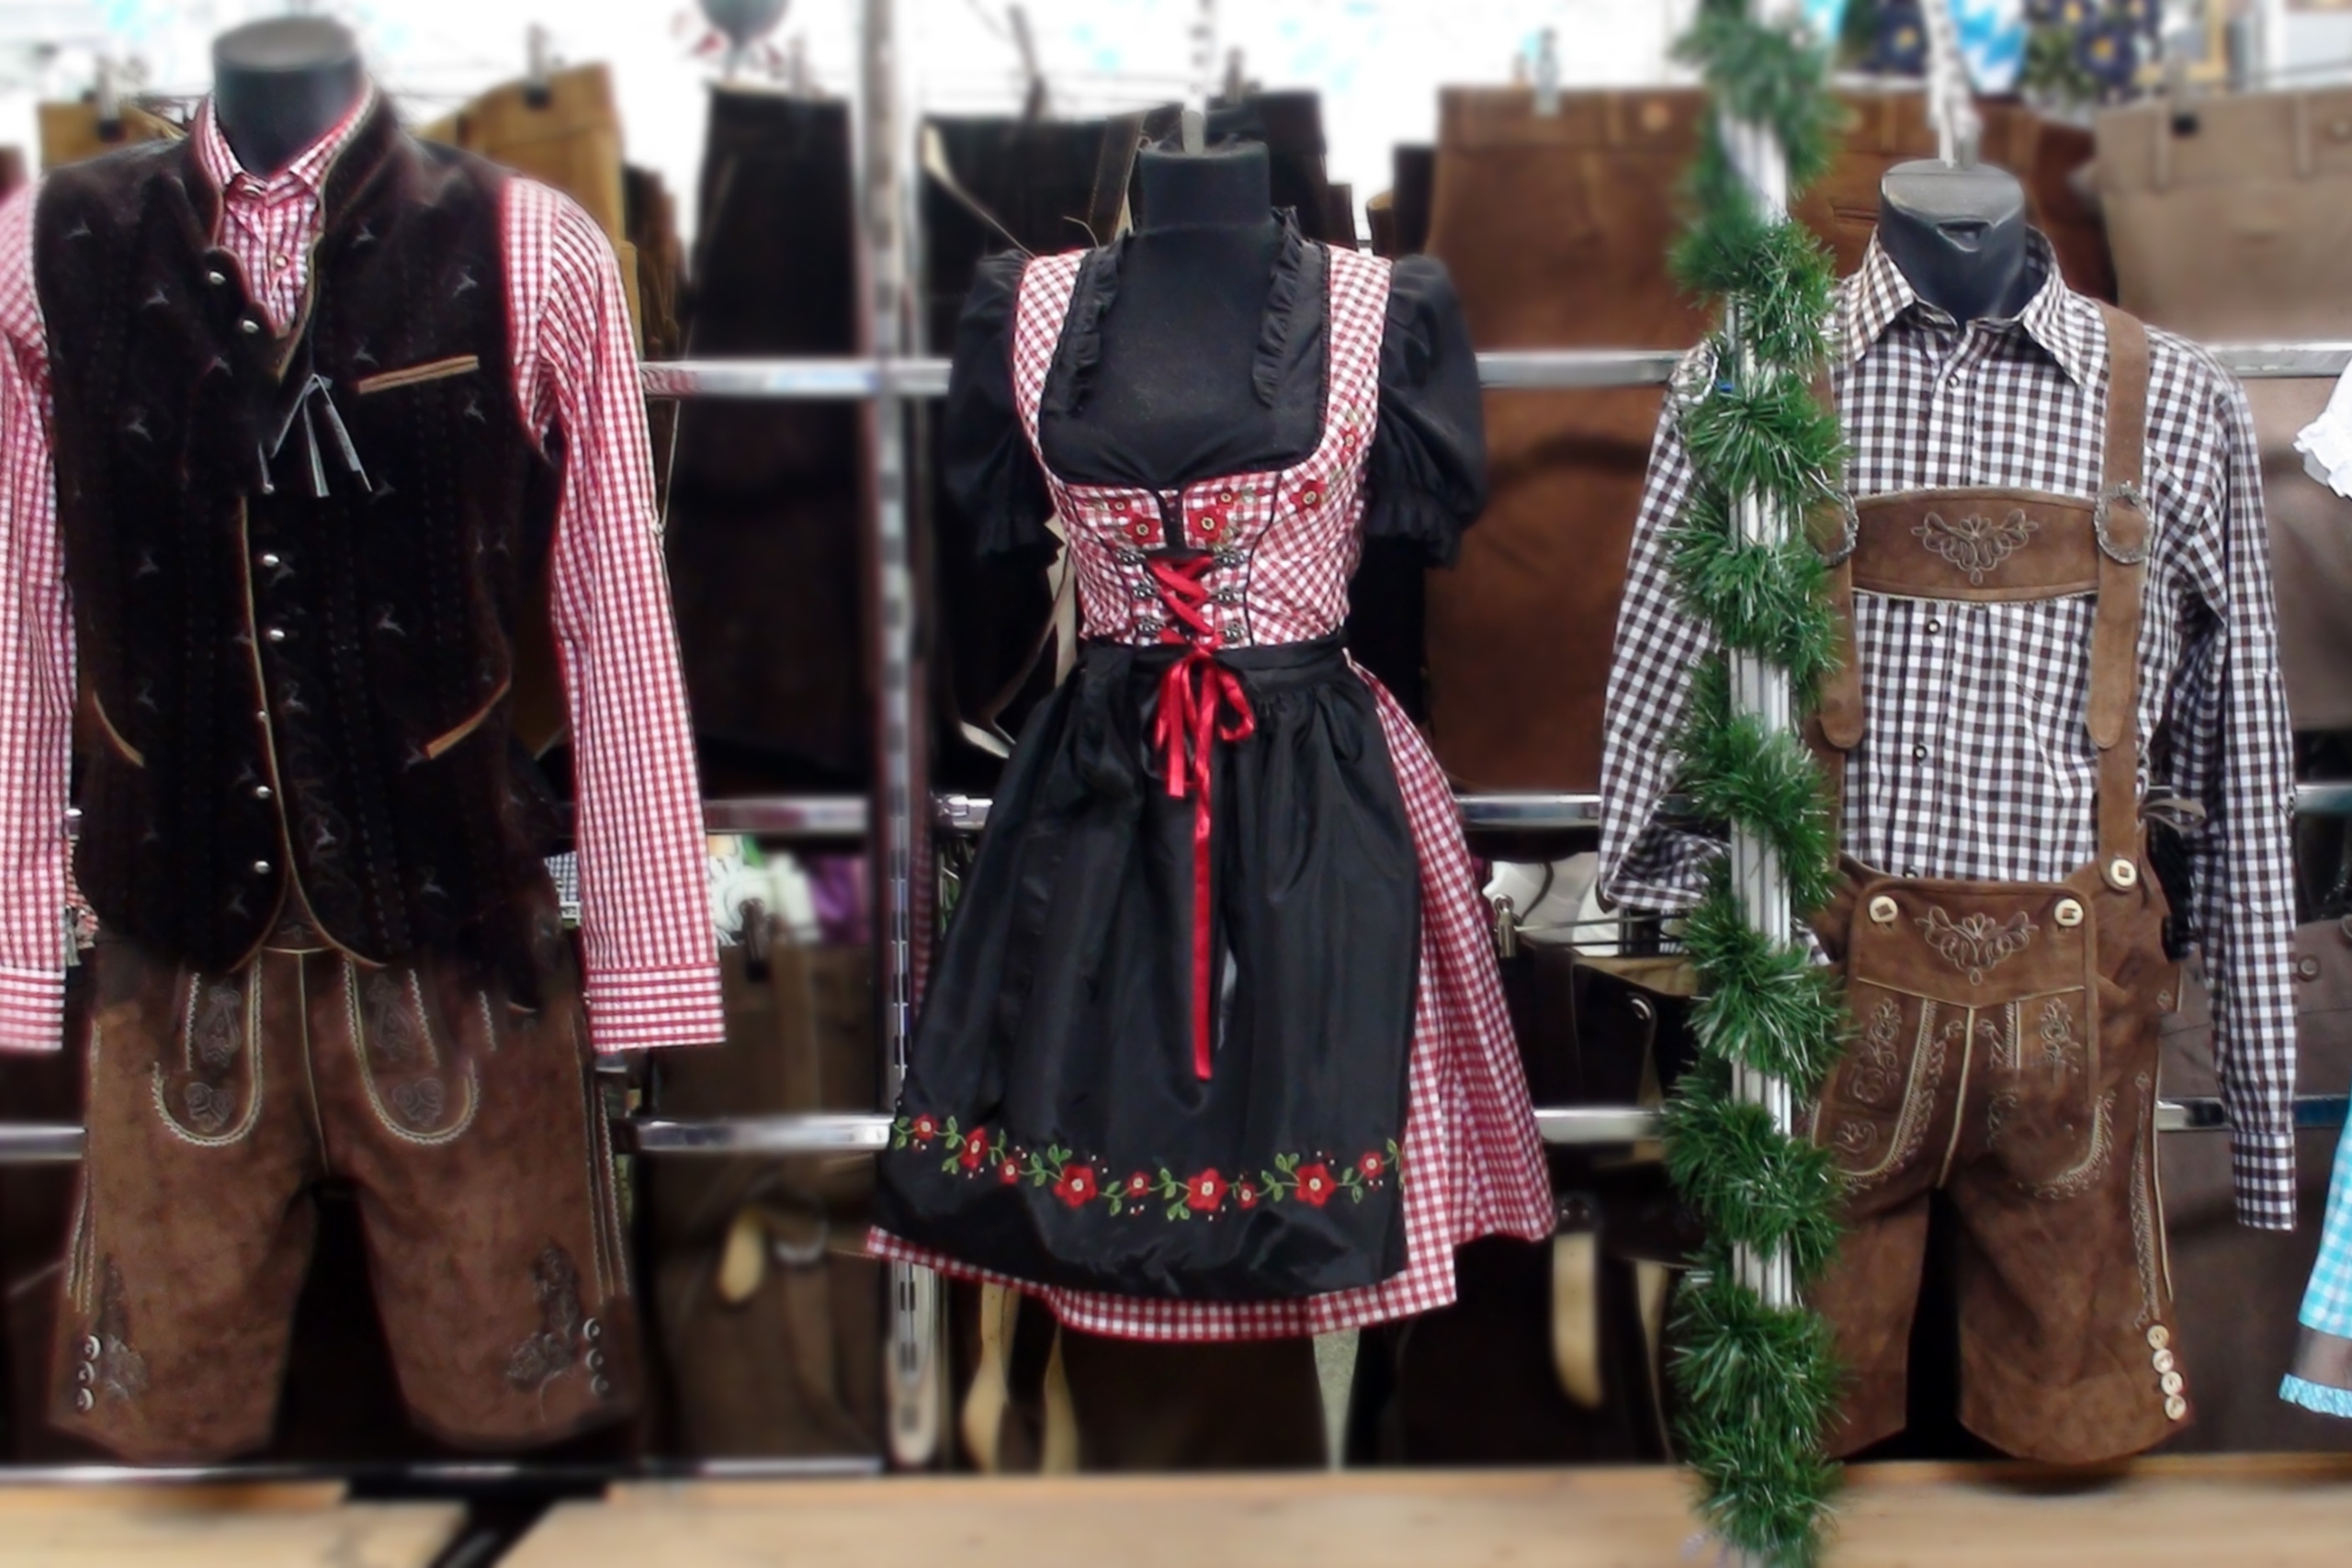 Crafting Tradition_ The Materials and Manufacturing Process of Lederhosen